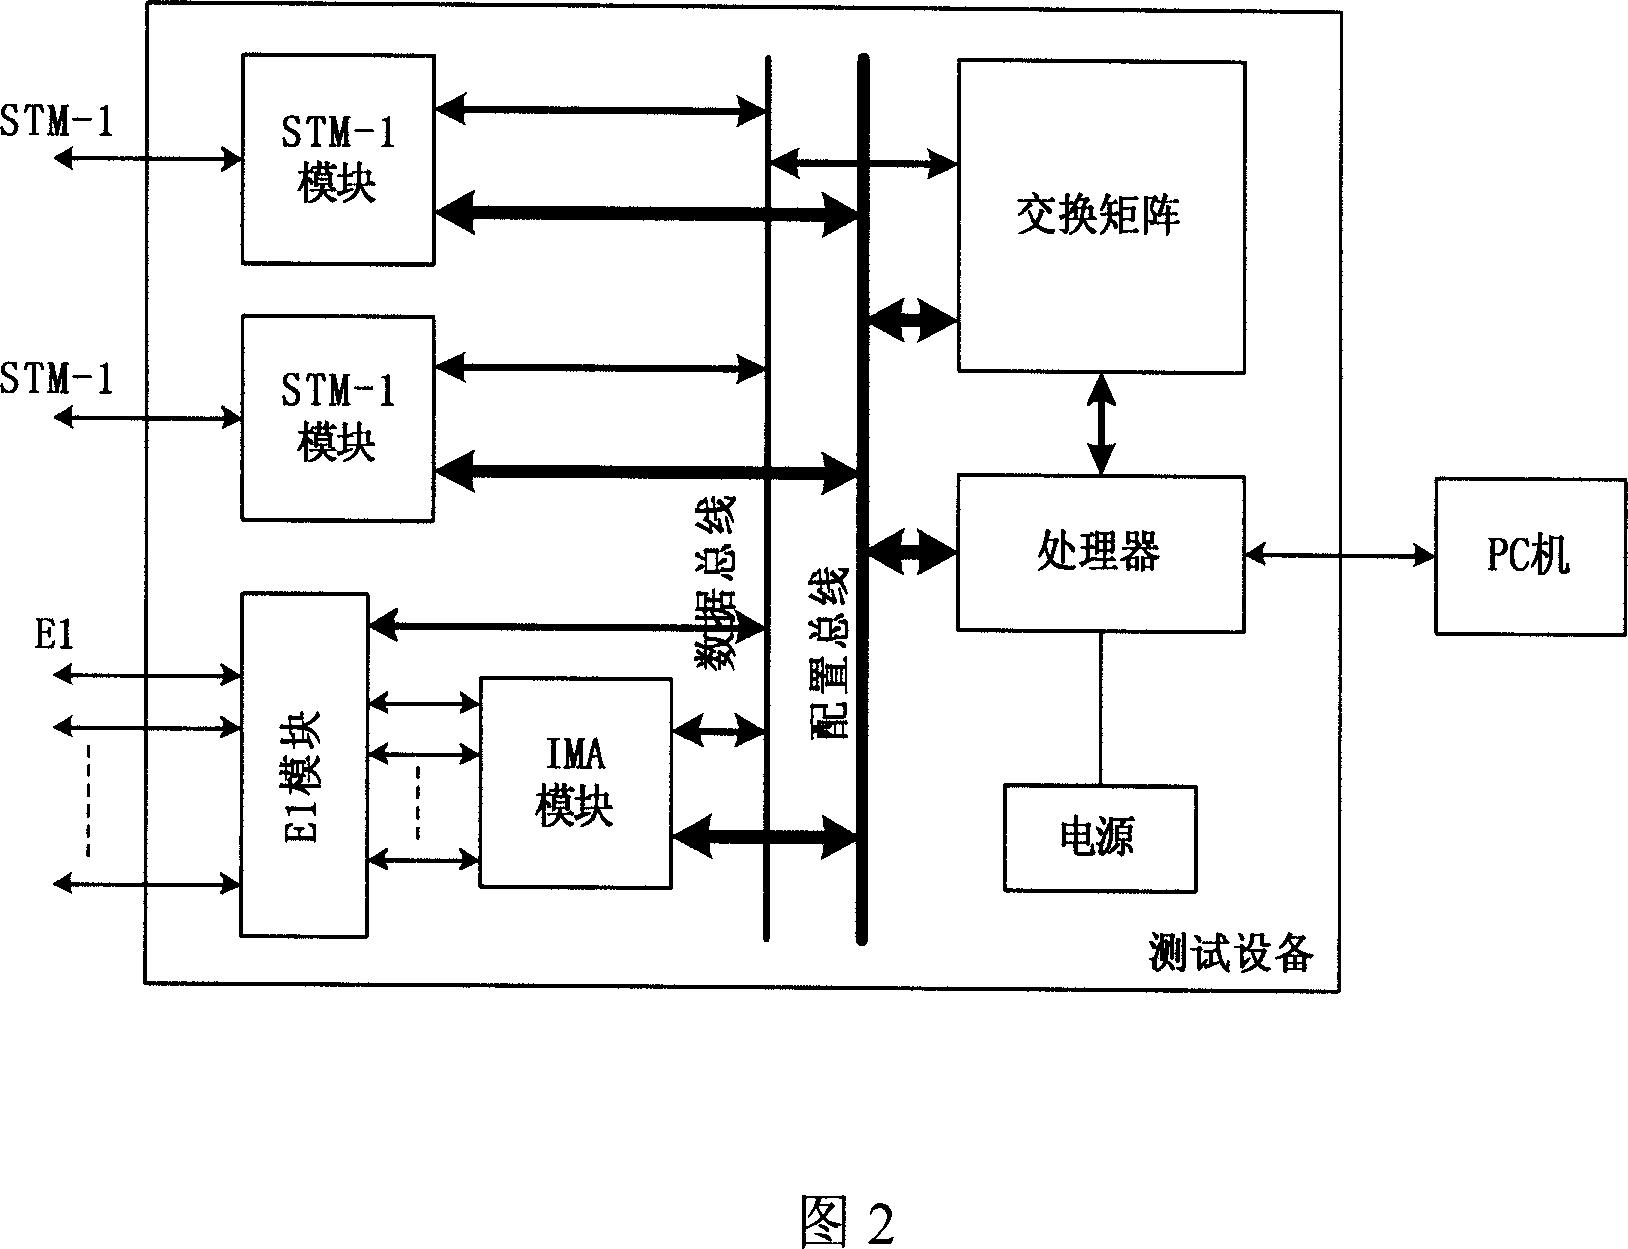 Data test device suitable for interface between base station and its controller